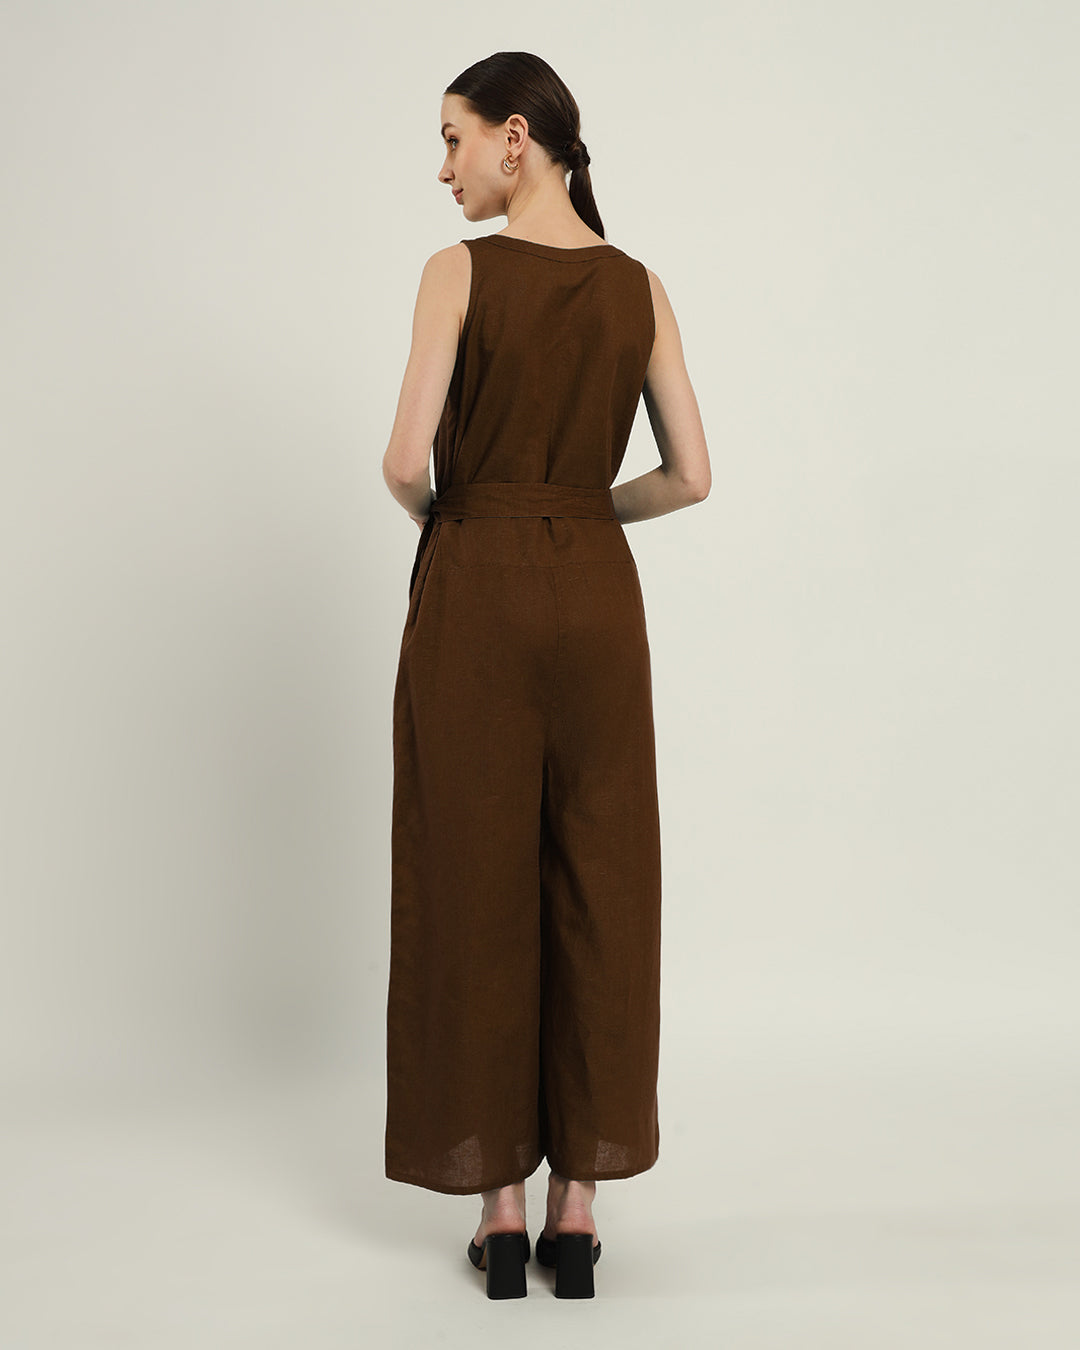 Nutshell Run The Show V Neck Button Down Jumpsuit